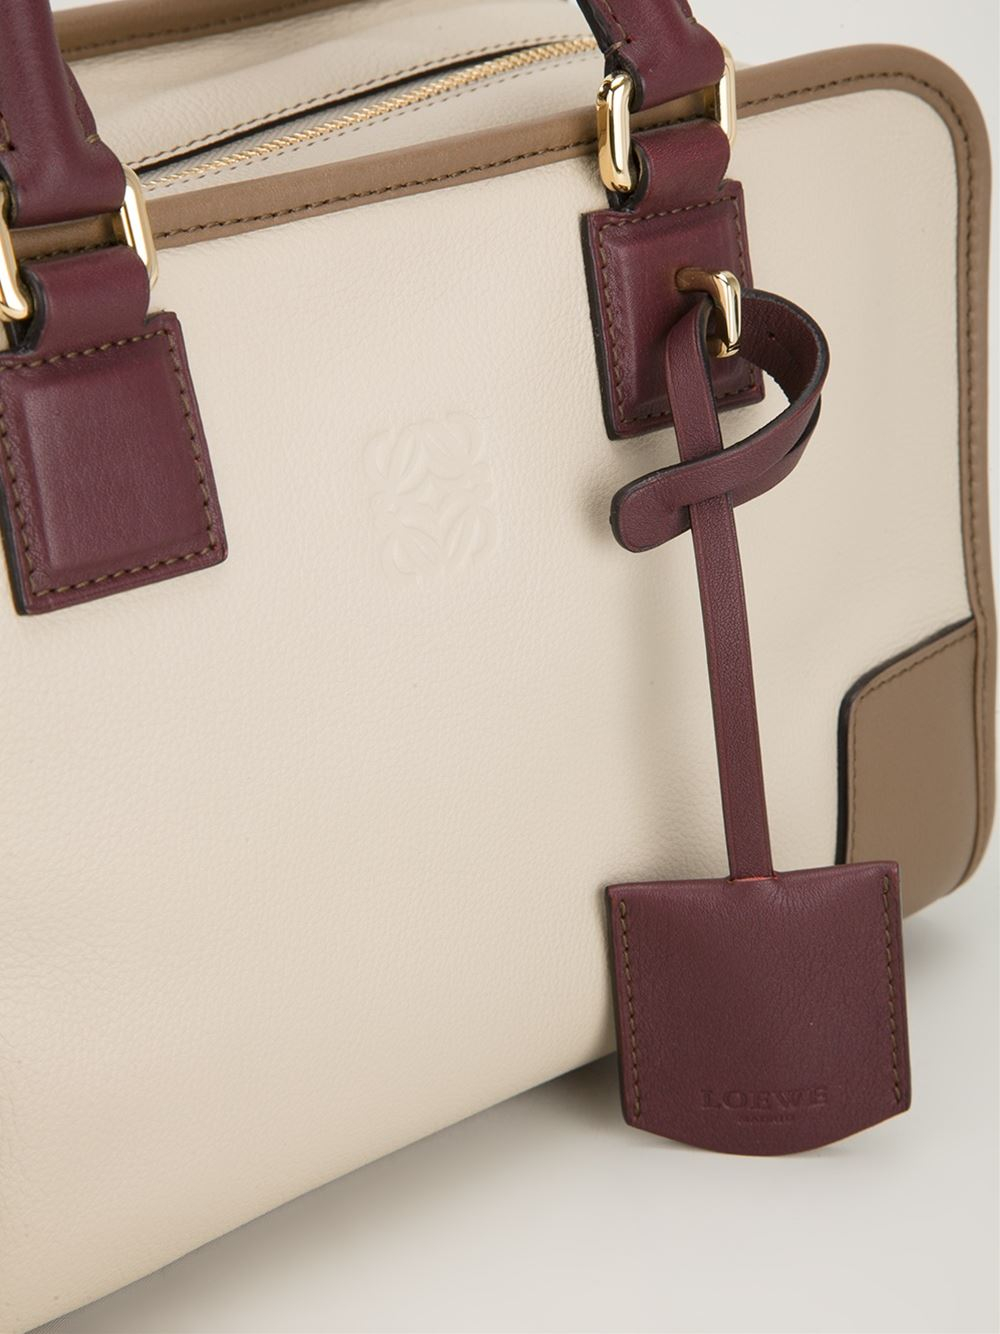 Loewe Structured Rectangle Tote Bag in Natural - Lyst